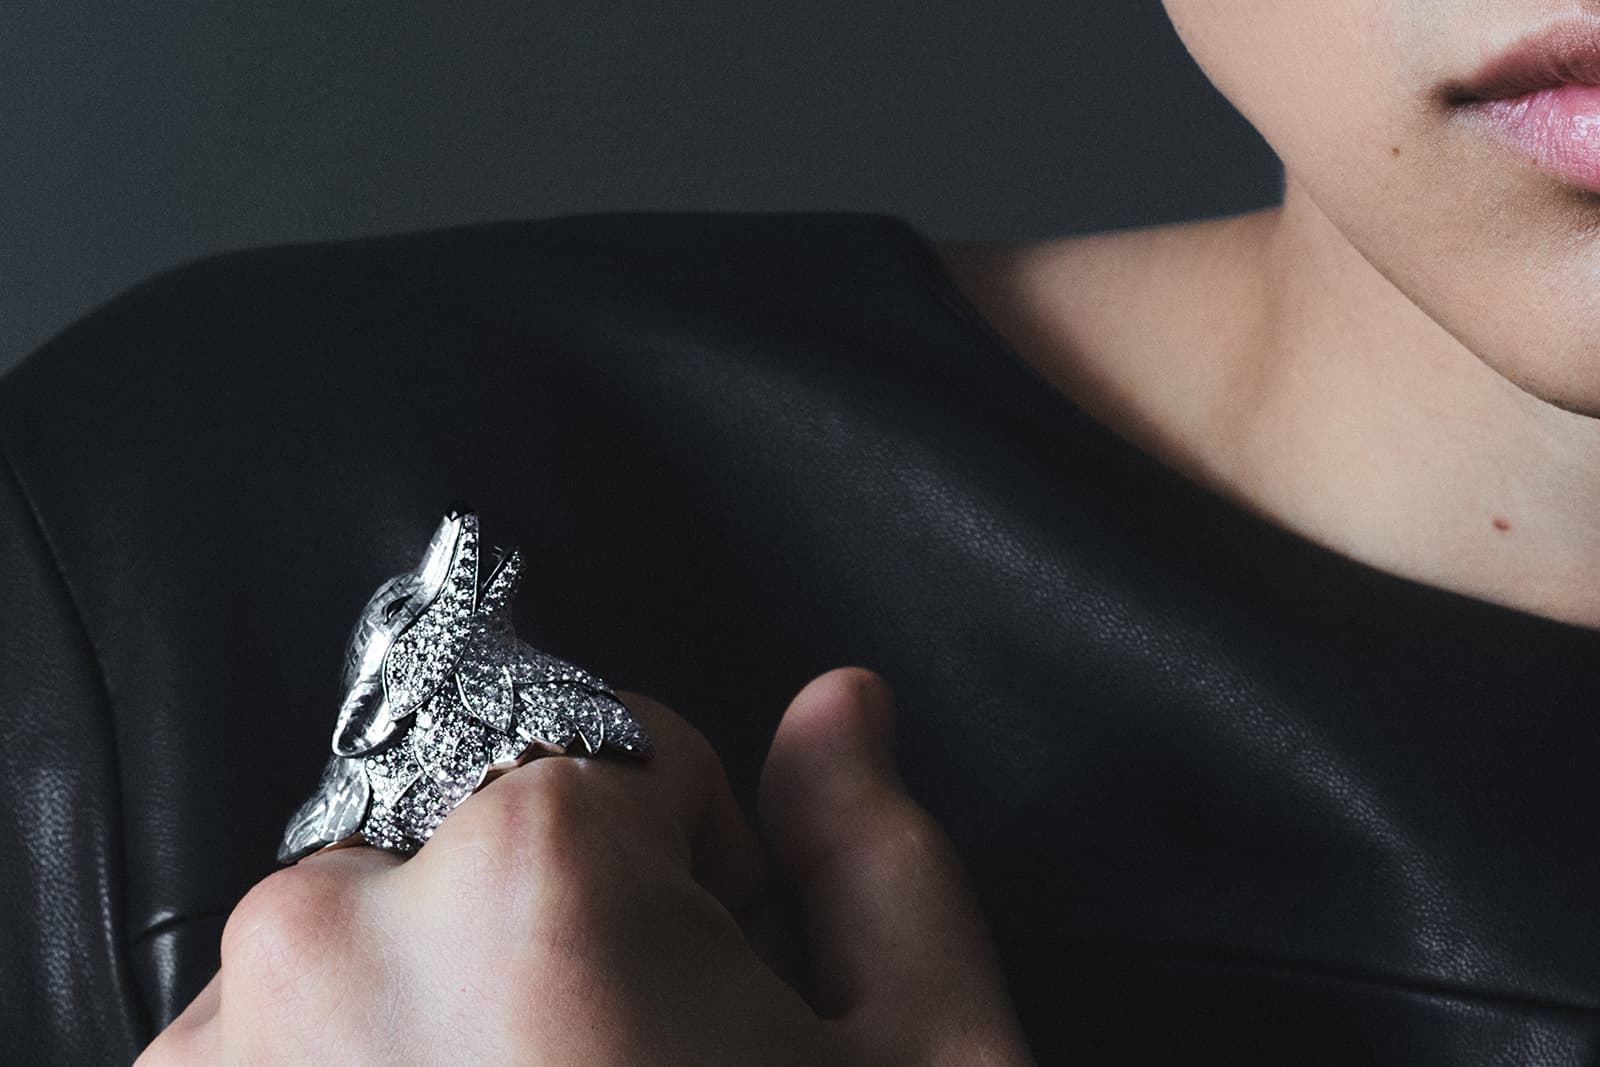 High Jewellery for Men is Here to Stay